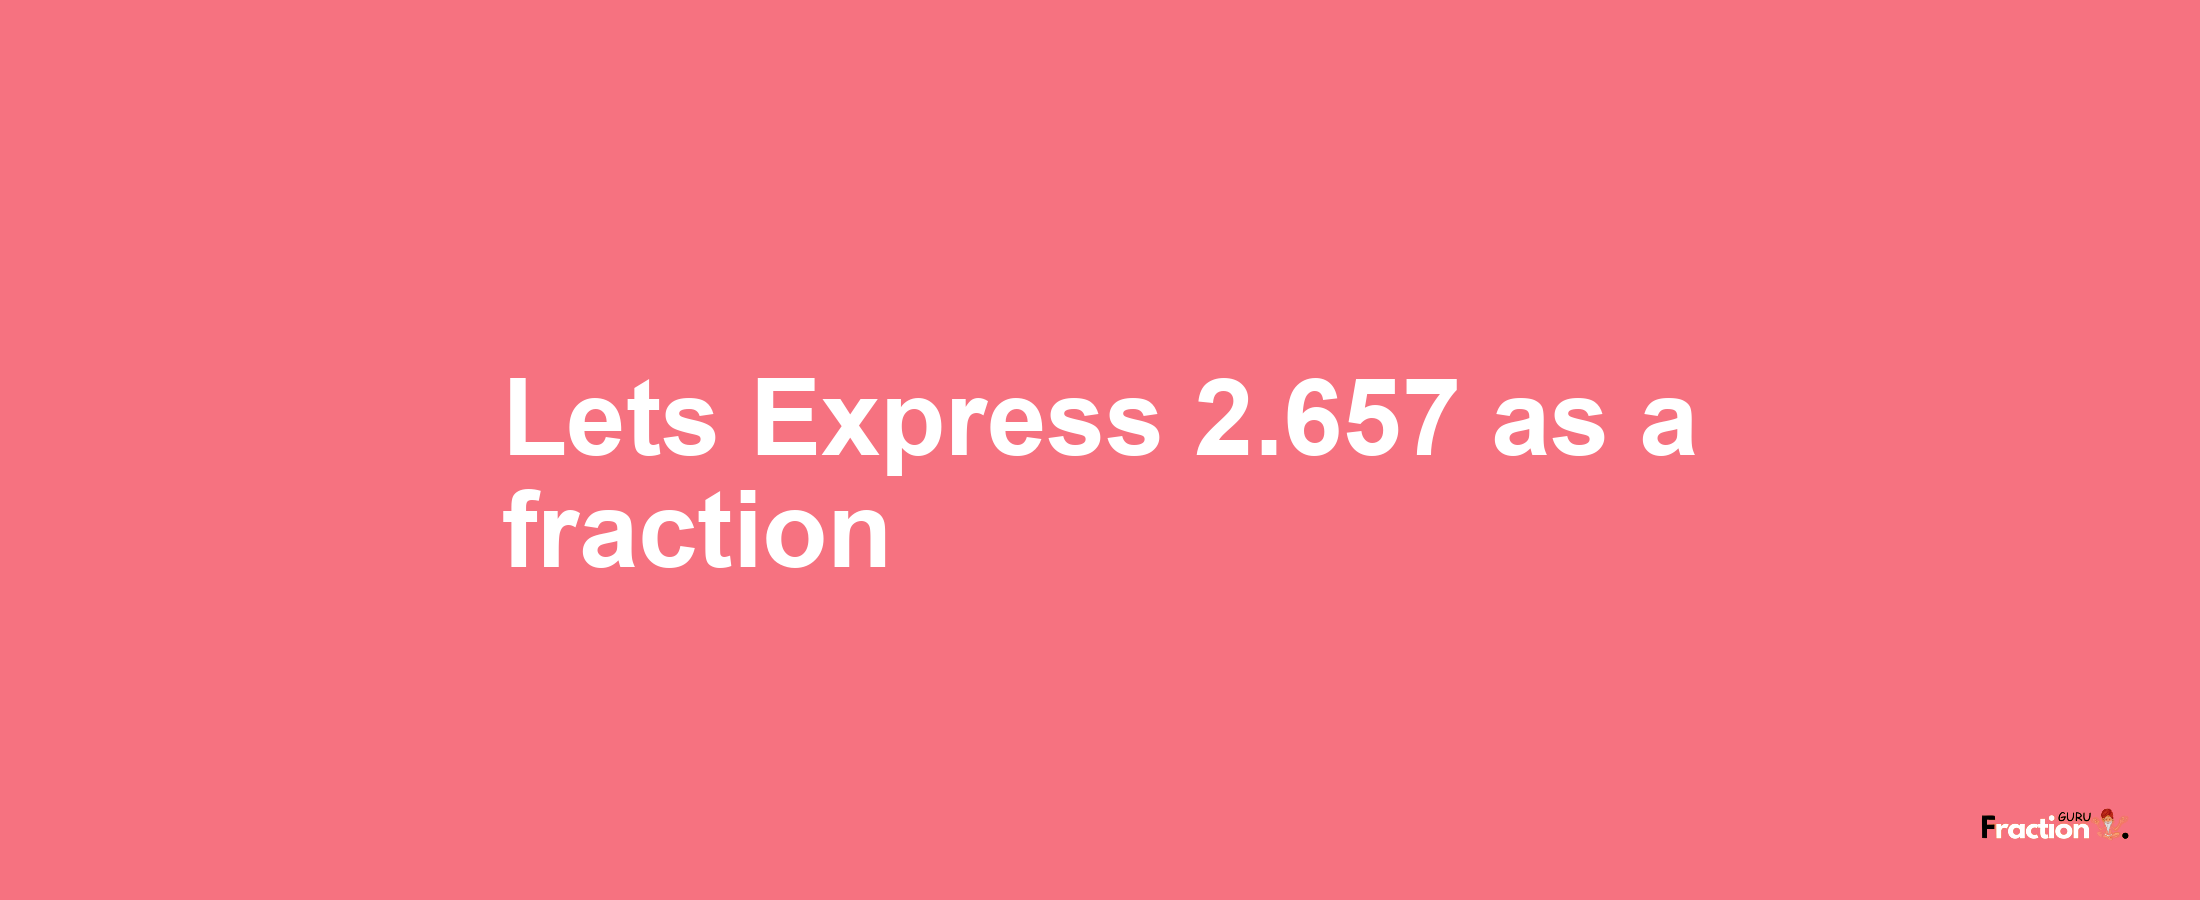 Lets Express 2.657 as afraction